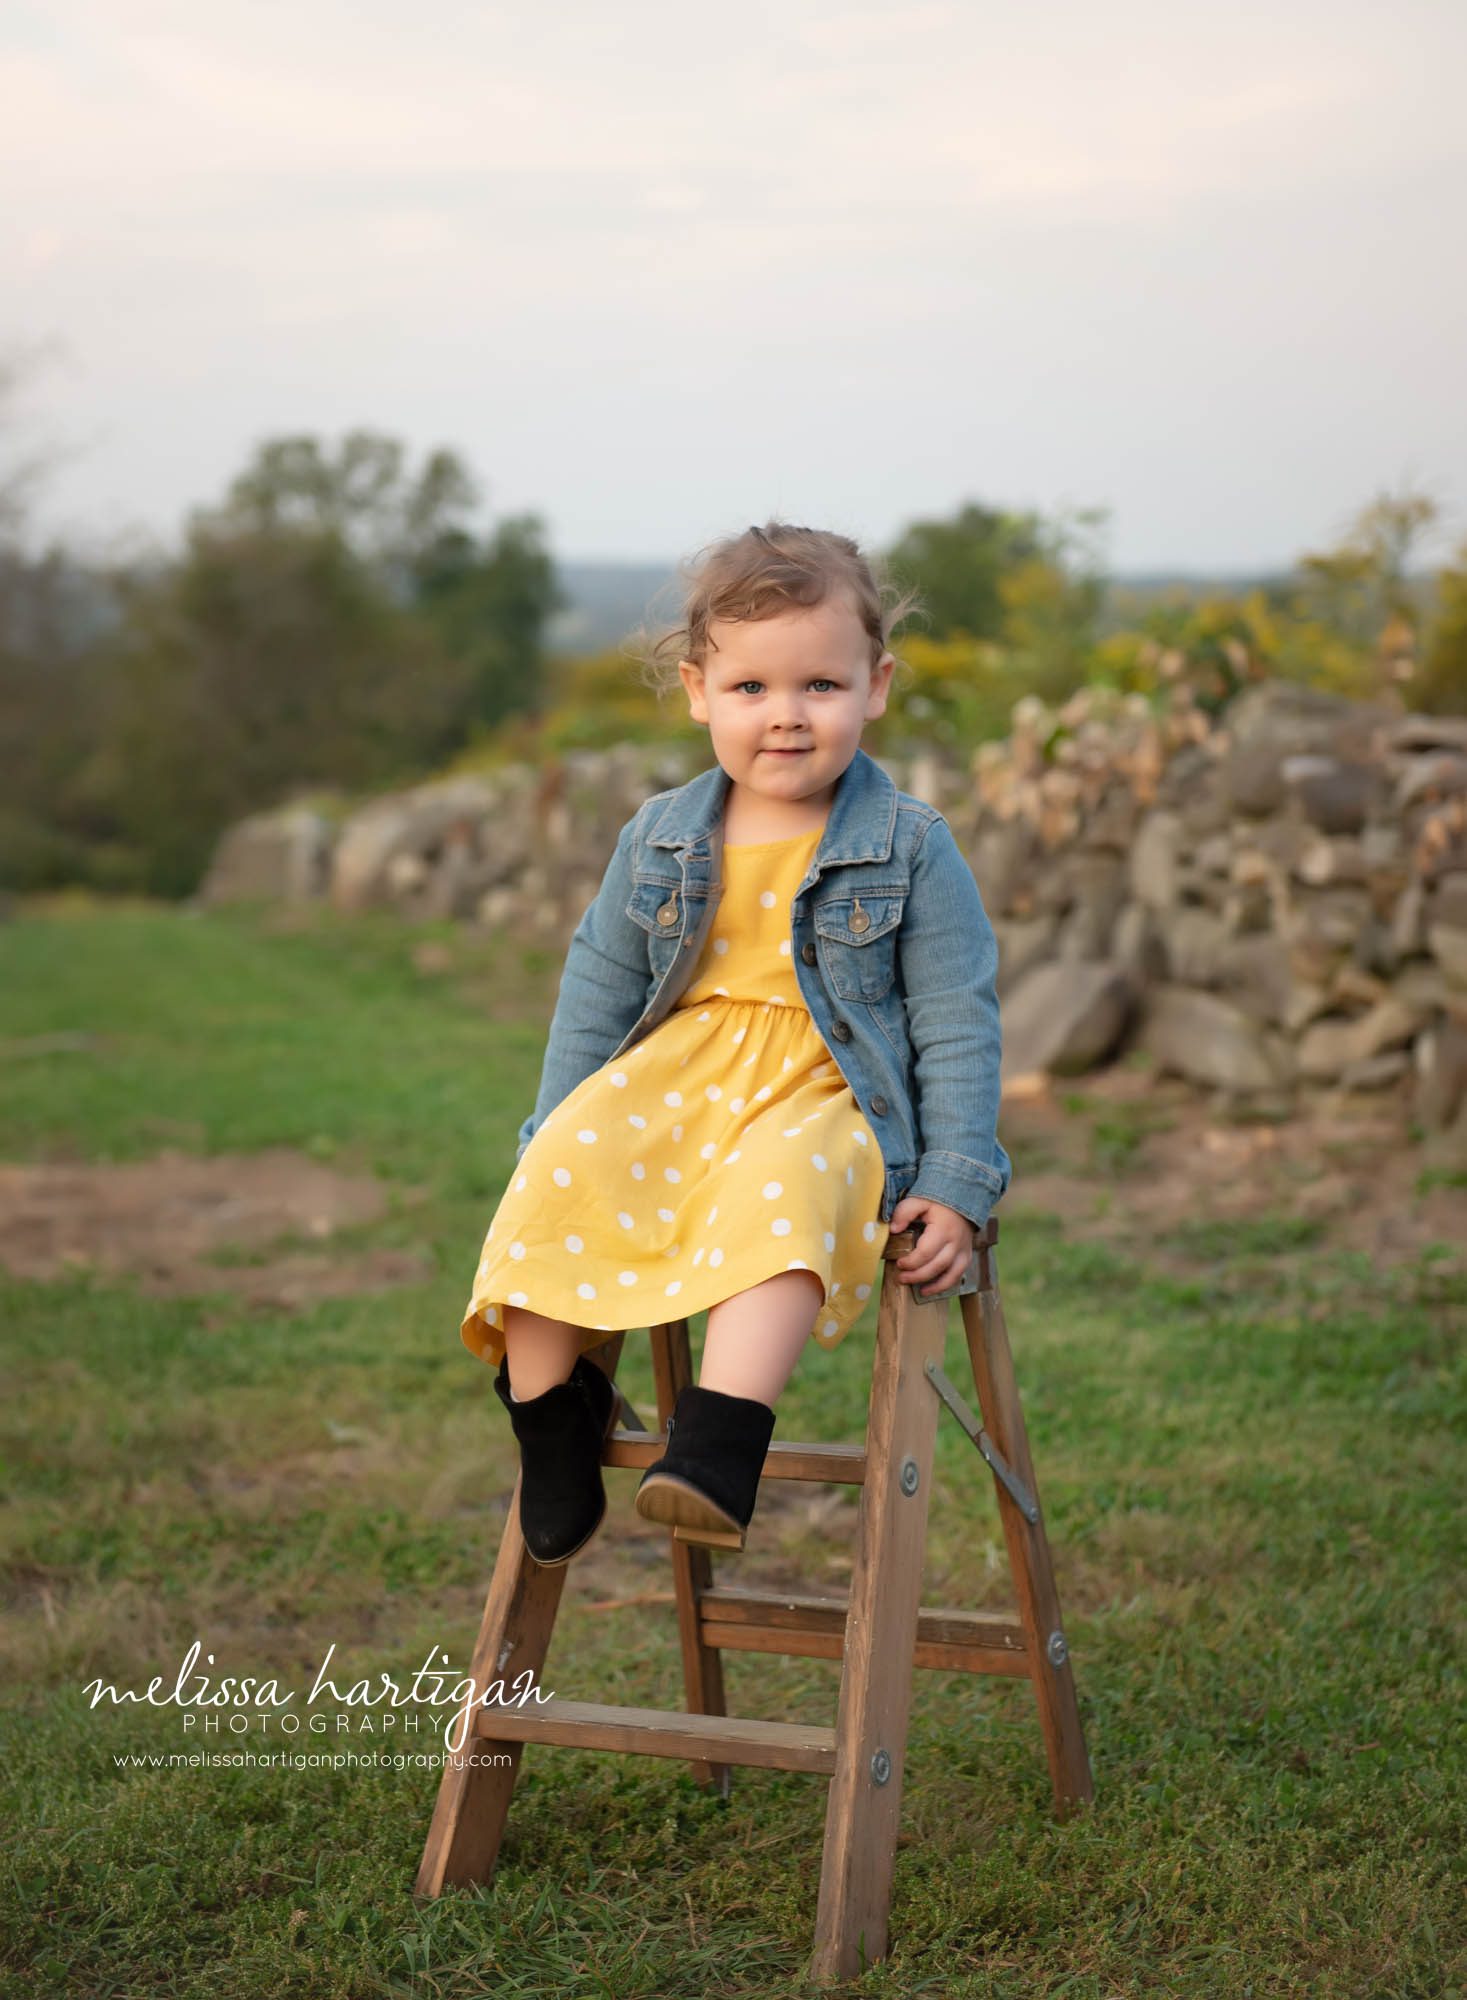 Little girl sitting on wooden step stool family photo session in CT park